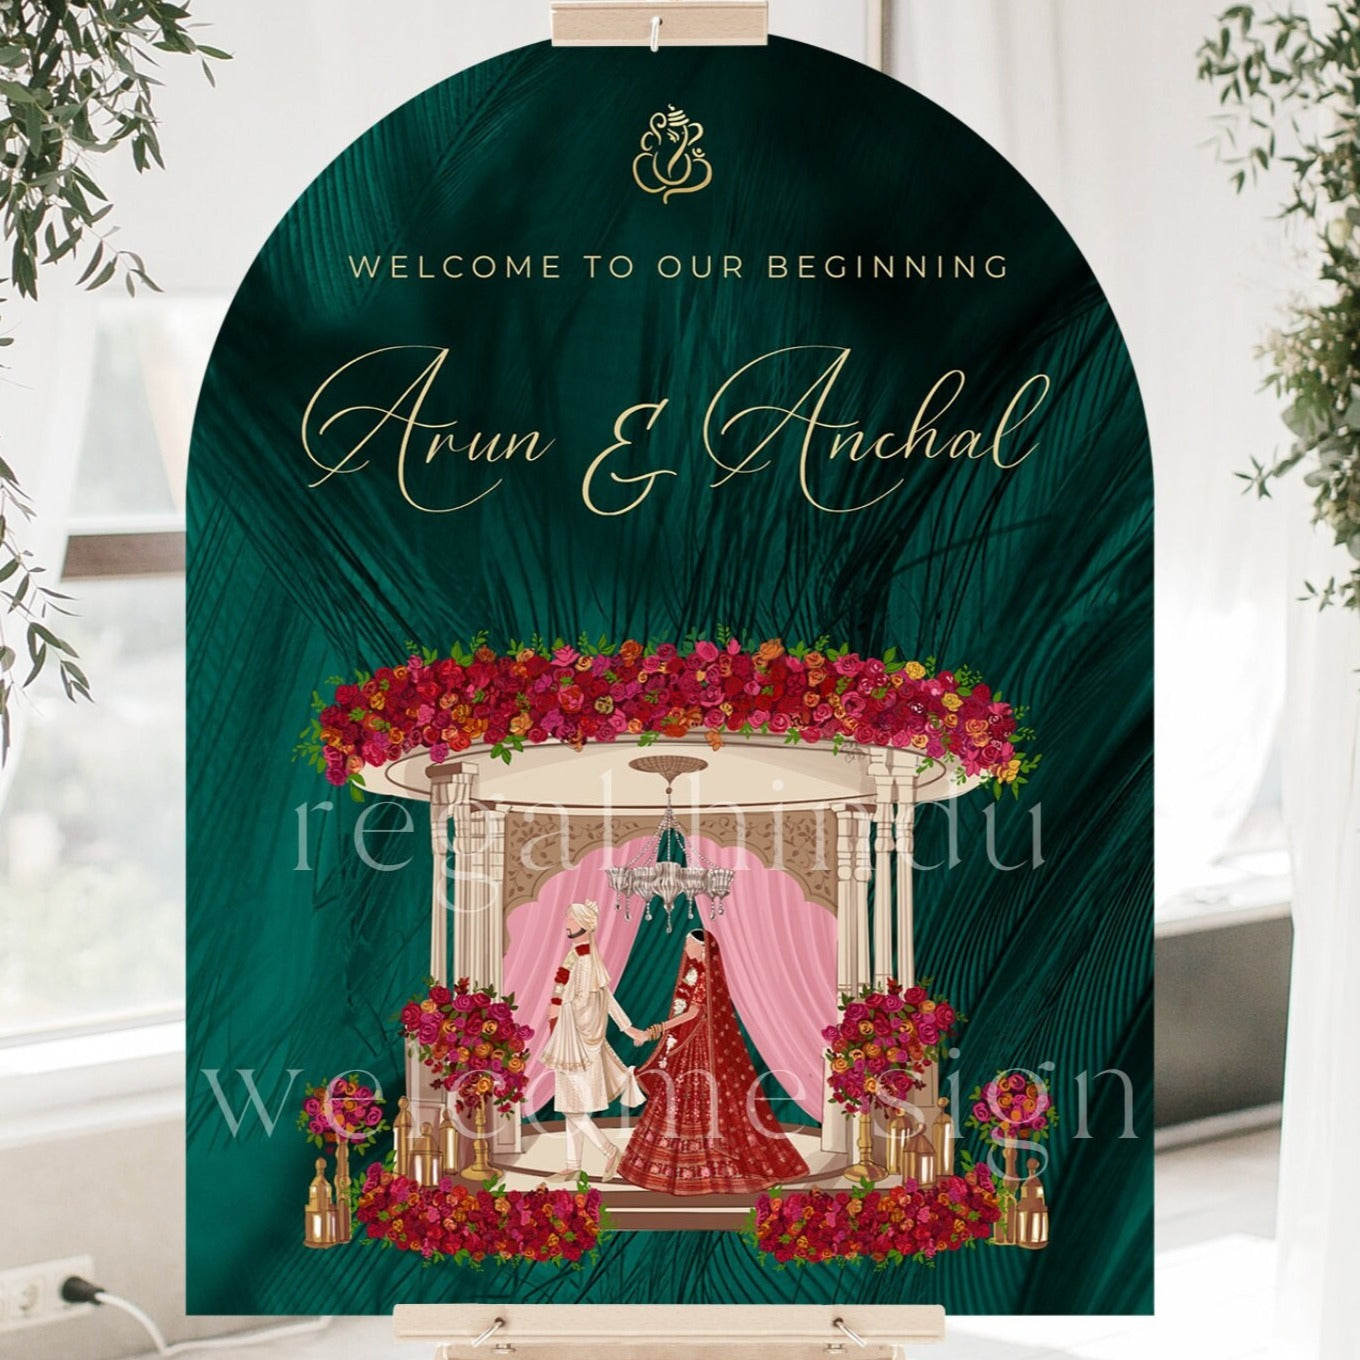 Indian Arch Wedding Welcome Sign - Hindu Wedding Signs Printed on Foamex A1 or A2 with Mandap Illustration